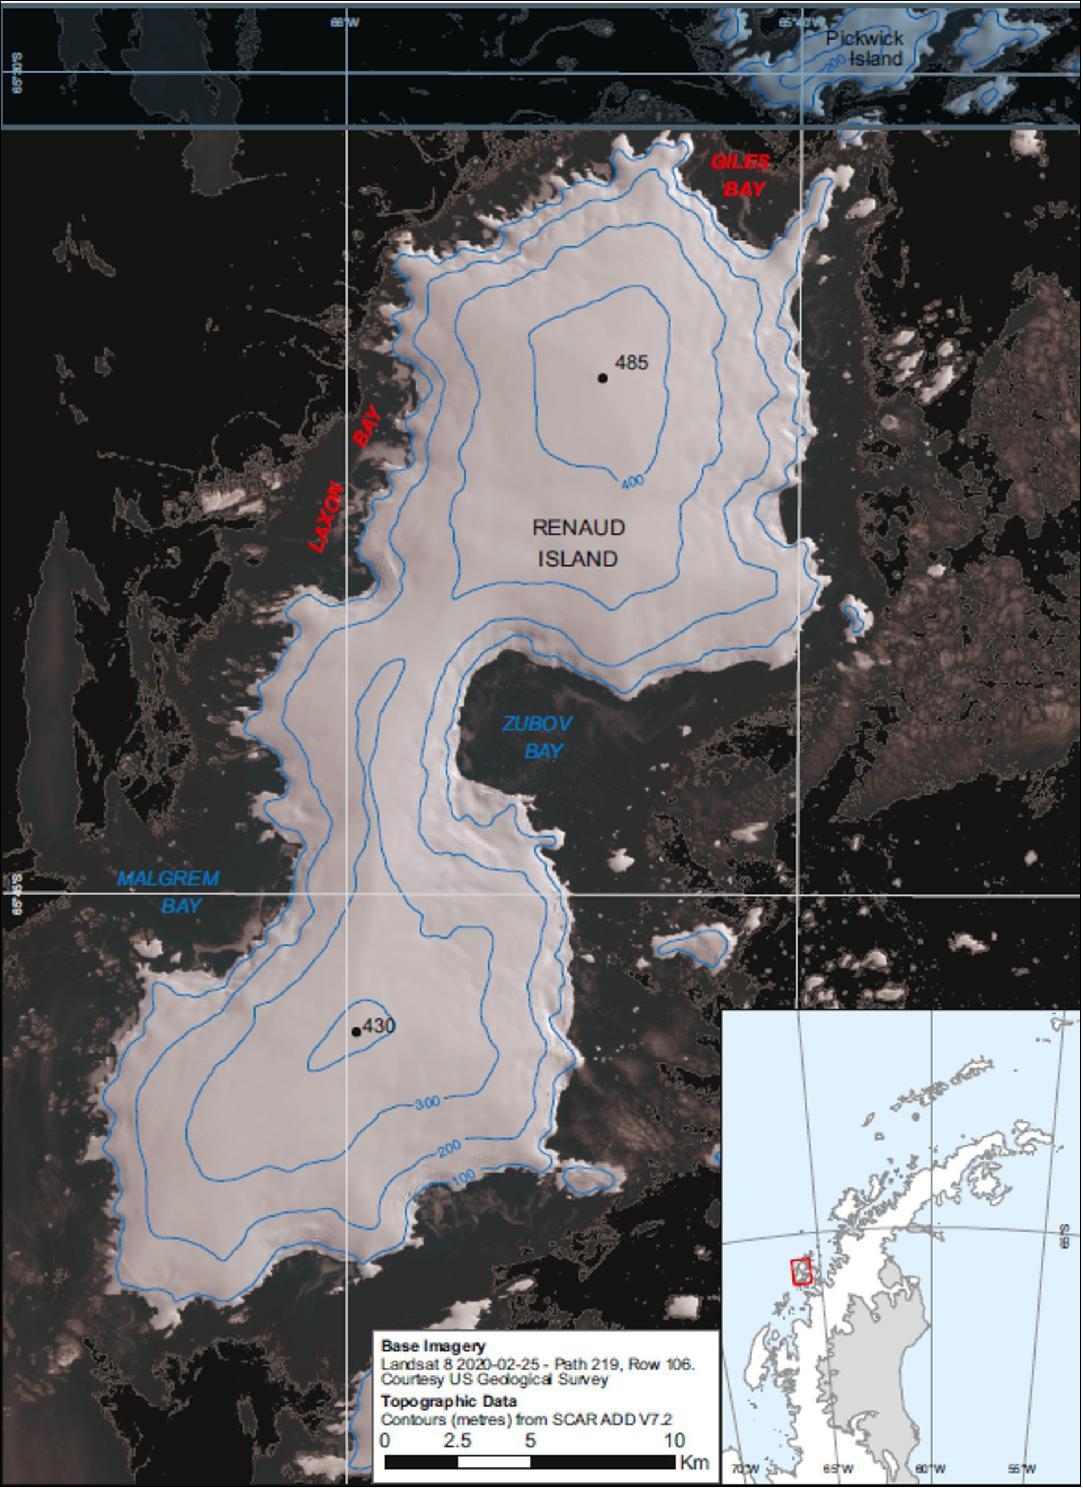 Figure 25: Laxon Bay lies in the northwest of the Antarctic Peninsula. Laxon Bay is about 10 km wide and 3 km deep and lies between Palosuo Islands and the west side of Renaud Island, Biscoe Islands. The research of Seymour Laxon pioneered the use of satellite altimetry to measure the gravity field, sea-ice thickness and surface circulation in the polar oceans. His work provided evidence that enabled the development of the CryoSat mission. Giles Bay also lies in the northwest of the Antarctic Peninsula. Giles Bay is about 4 km wide and 3 km deep and lies between Weaver Point and Tula Point at the northern end of Renaud Island, Biscoe Islands. Katharine Gilles' research focussed on sea ice, ocean circulation and wind patterns, and the use of satellite altimetry to measure the thickness of Arctic and Antarctic sea ice [image credit: CPOM (Center for Polar Observation and Modelling), located at the University of Leeds]